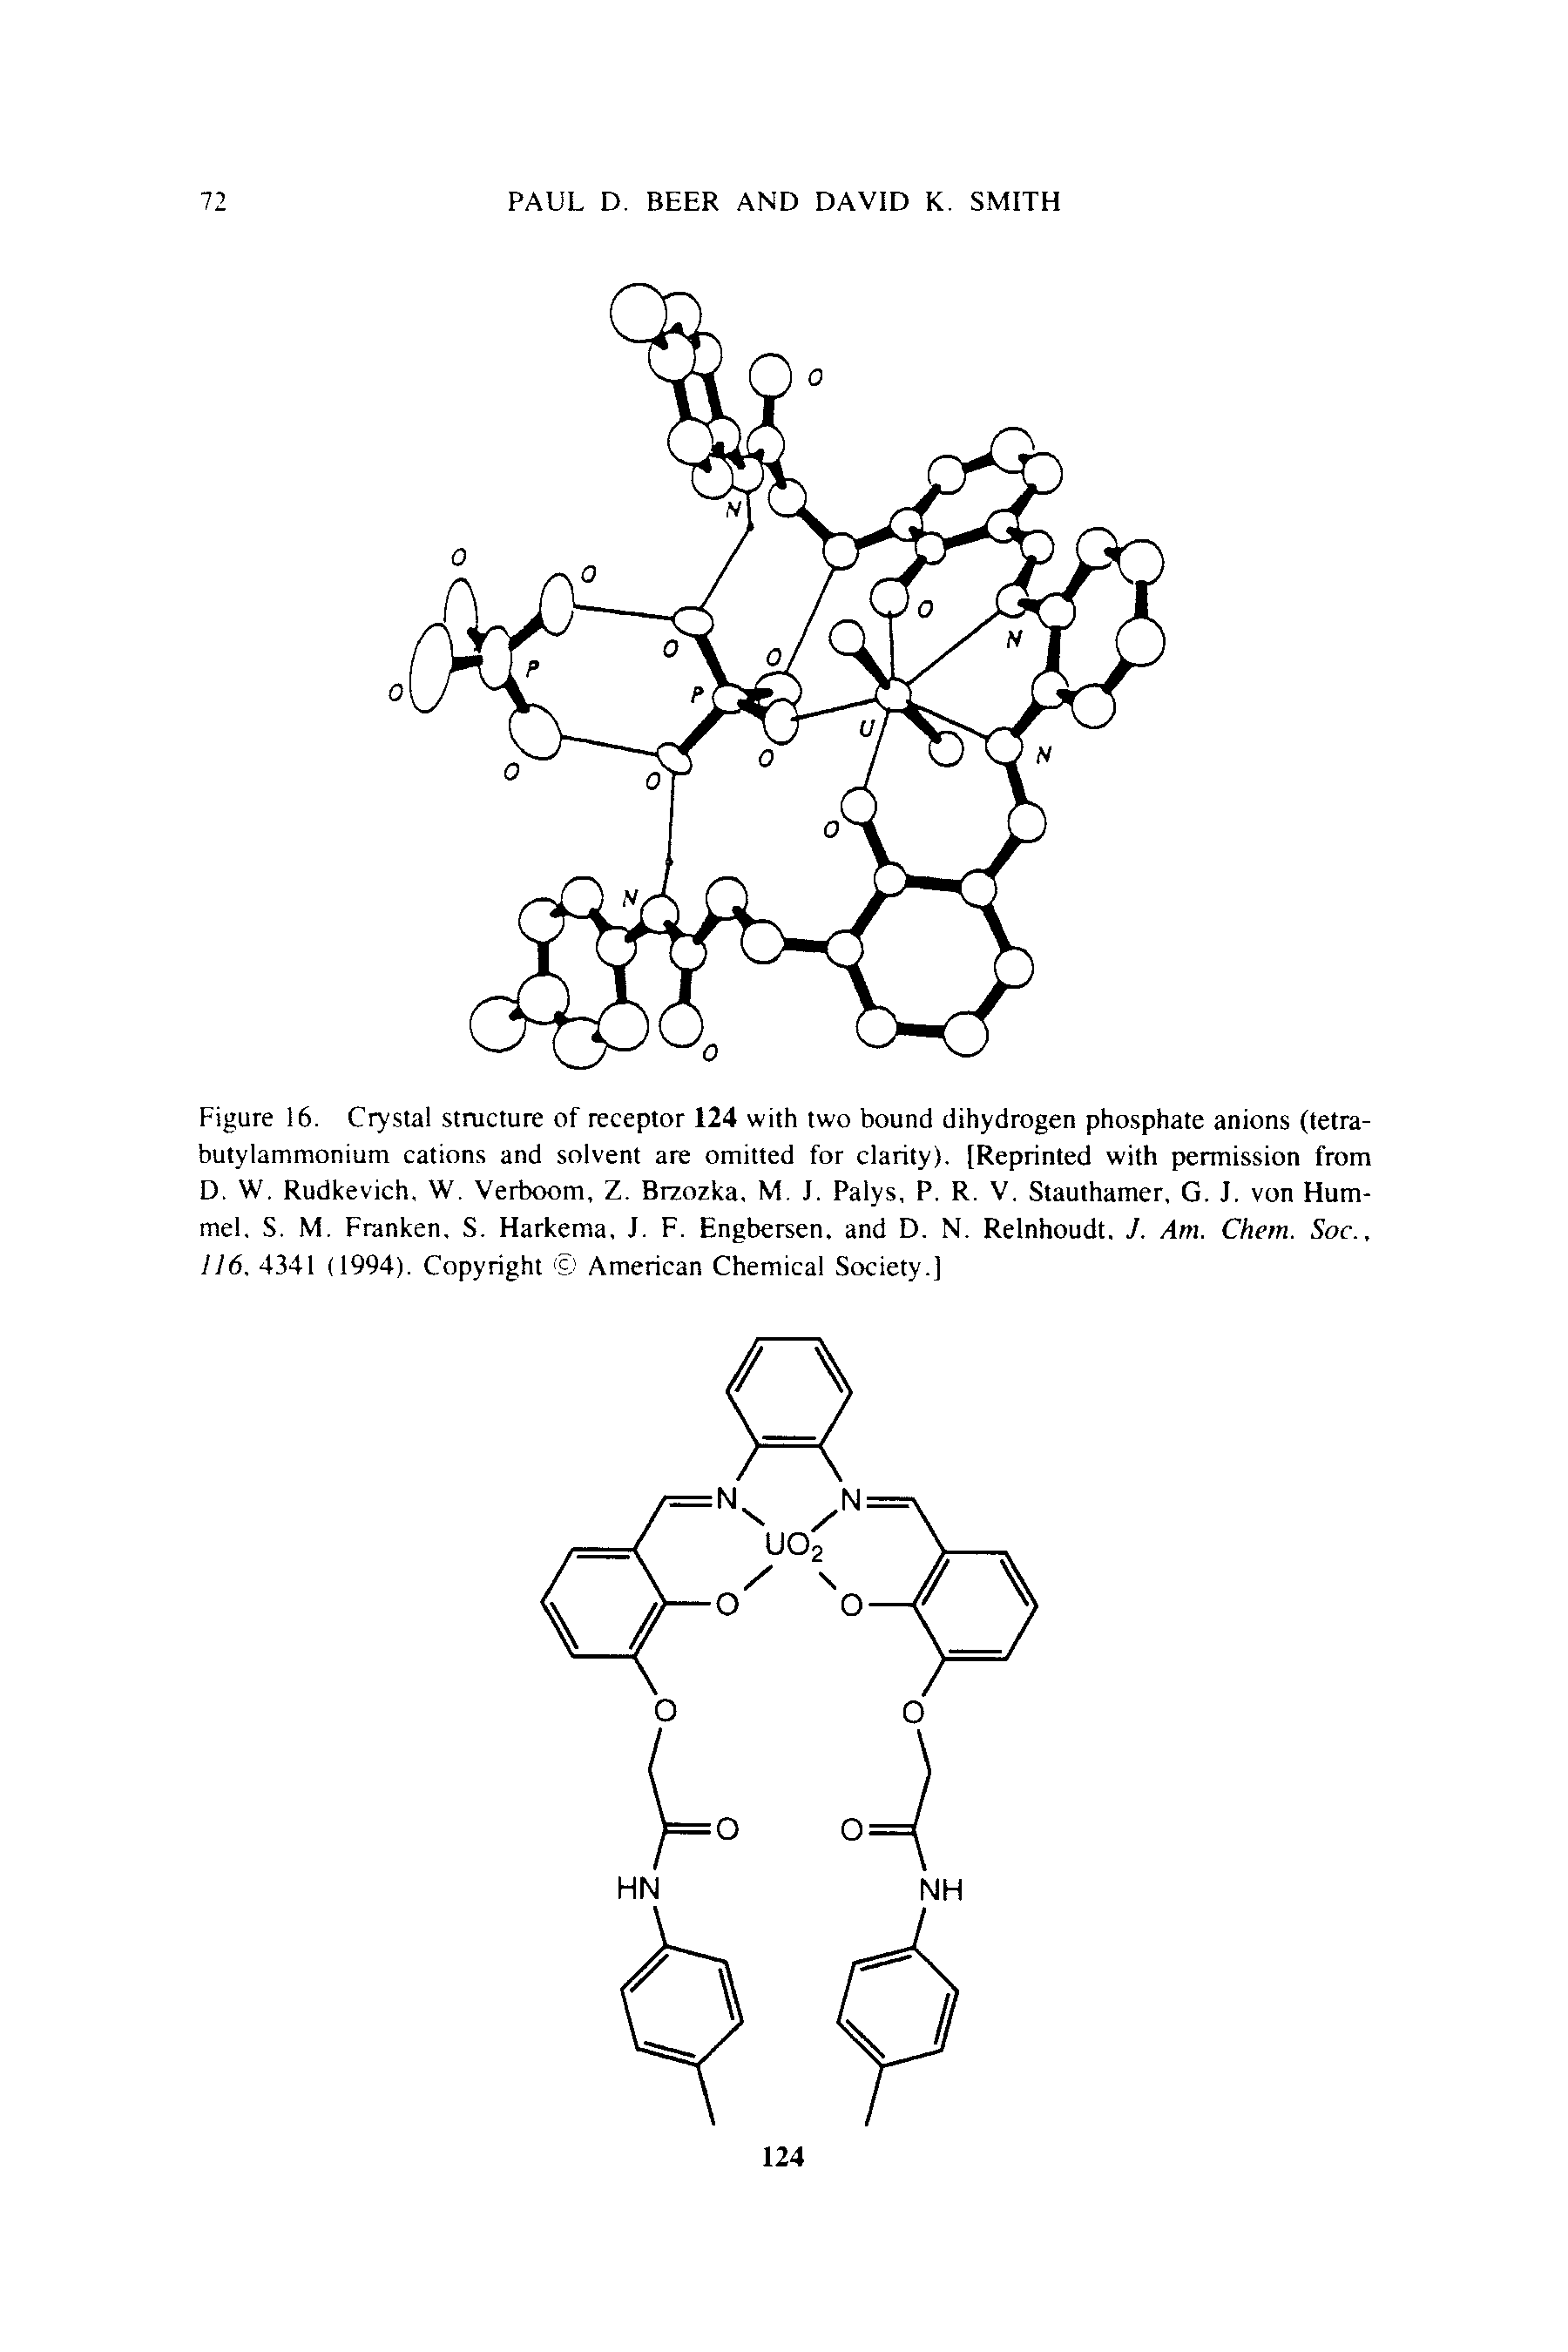 Figure 16. Crystal structure of receptor 124 with two bound dihydrogen phosphate anions (tetra-butylammonium cations and solvent are omitted for clarity). [Reprinted with permission from D. W. Rudkevich, W. Verboom, Z. Brzozka, M. J. Palys, P. R. V. Stauthamer, G. J. von Hummel. S. M. Franken. S. Harkema, J. F. Engbersen. and D. N. Relnhoudt. J. Am. Chem. Soc., 116. 4341 (1994). Copyright American Chemical Society.]...